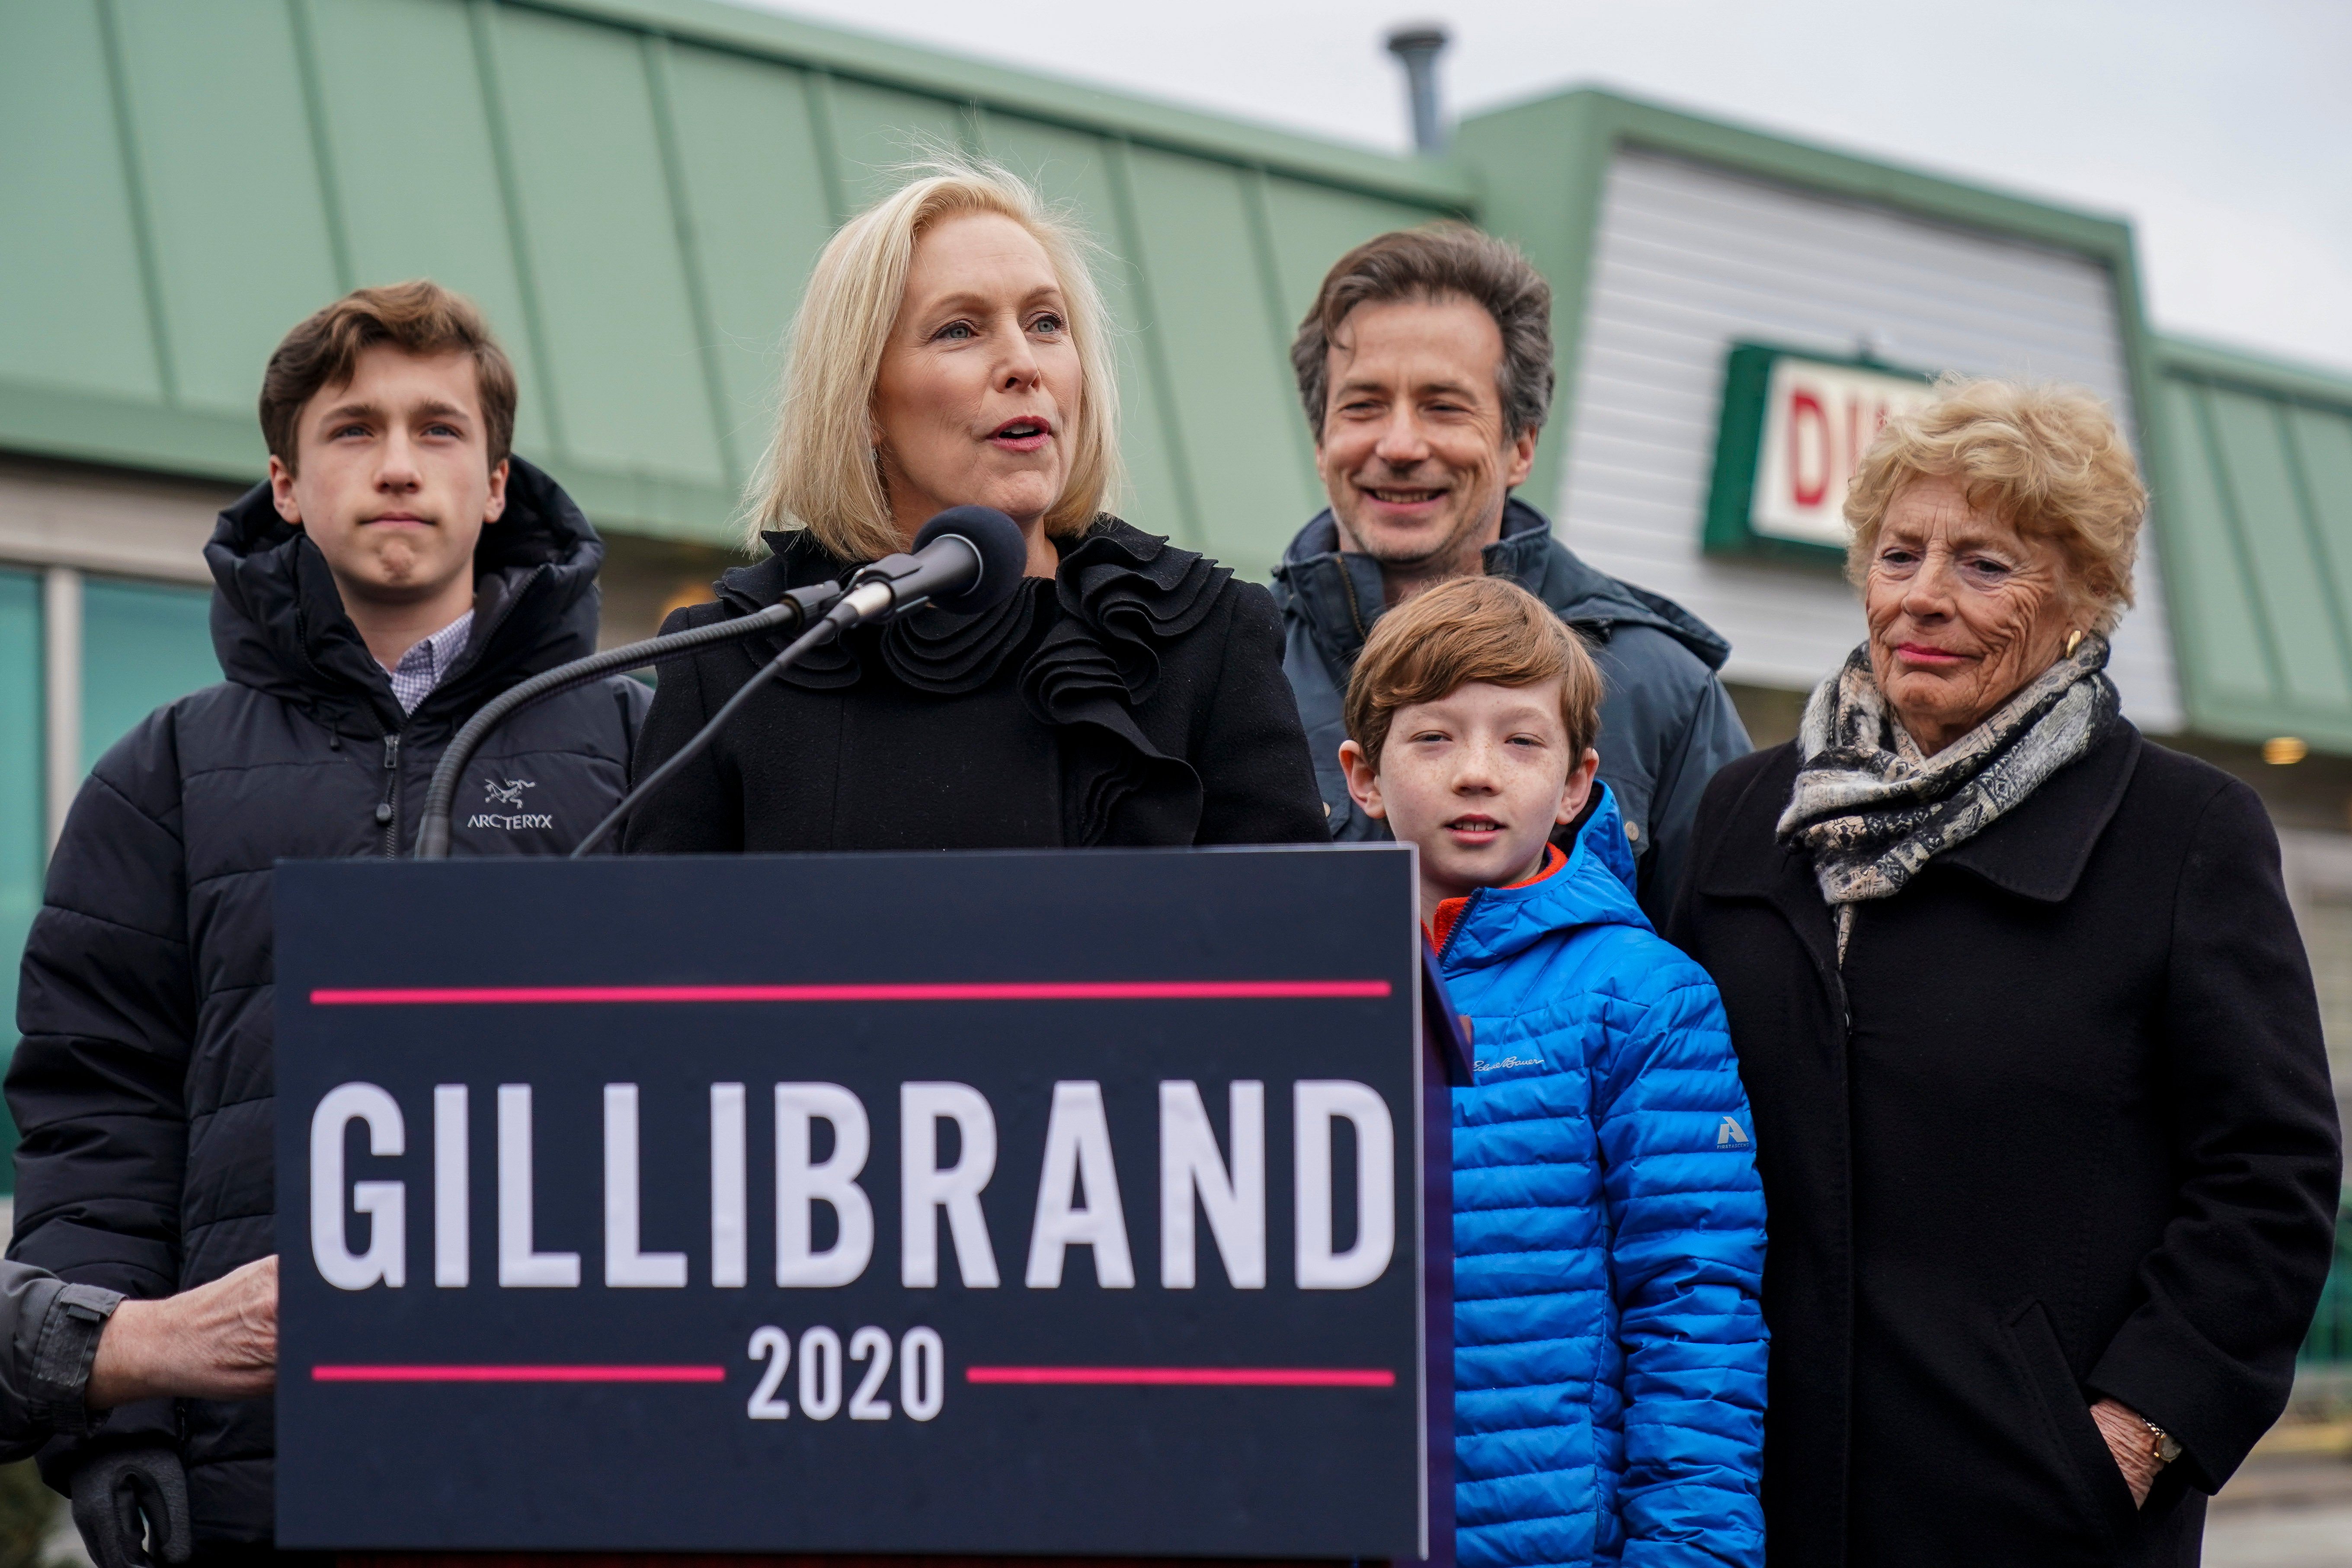 Surrounded by her family, Sen. Kirsten Gillibrand announces that she will run for president in 2020 outside the Country View Diner, January 16, 2019 in Troy, New York. (Photo by Drew Angerer/Getty Images)